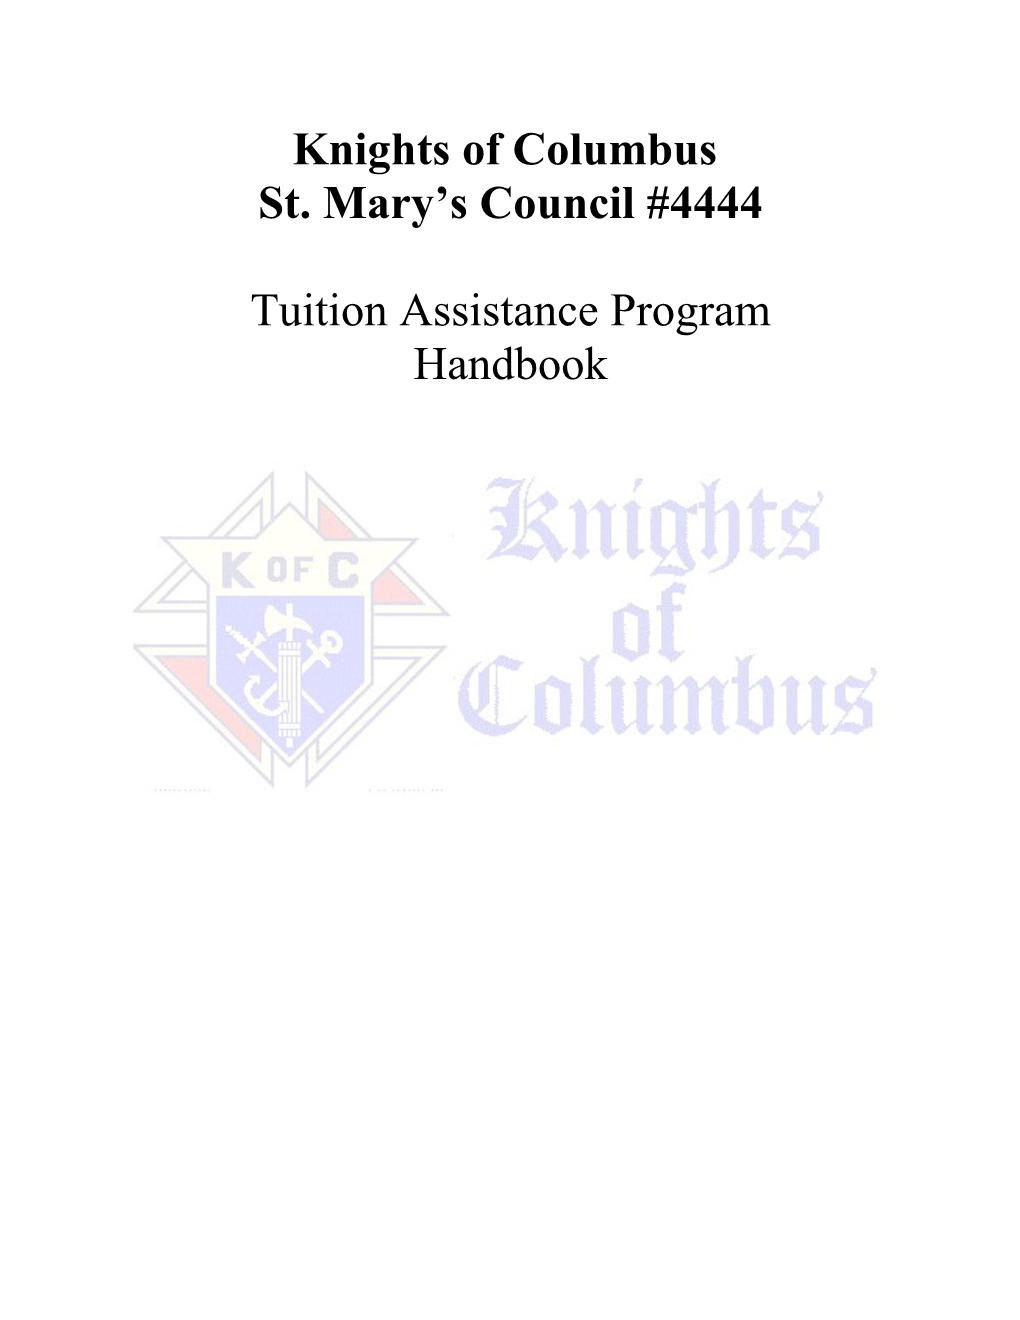 Knights of Columbus Council 4444